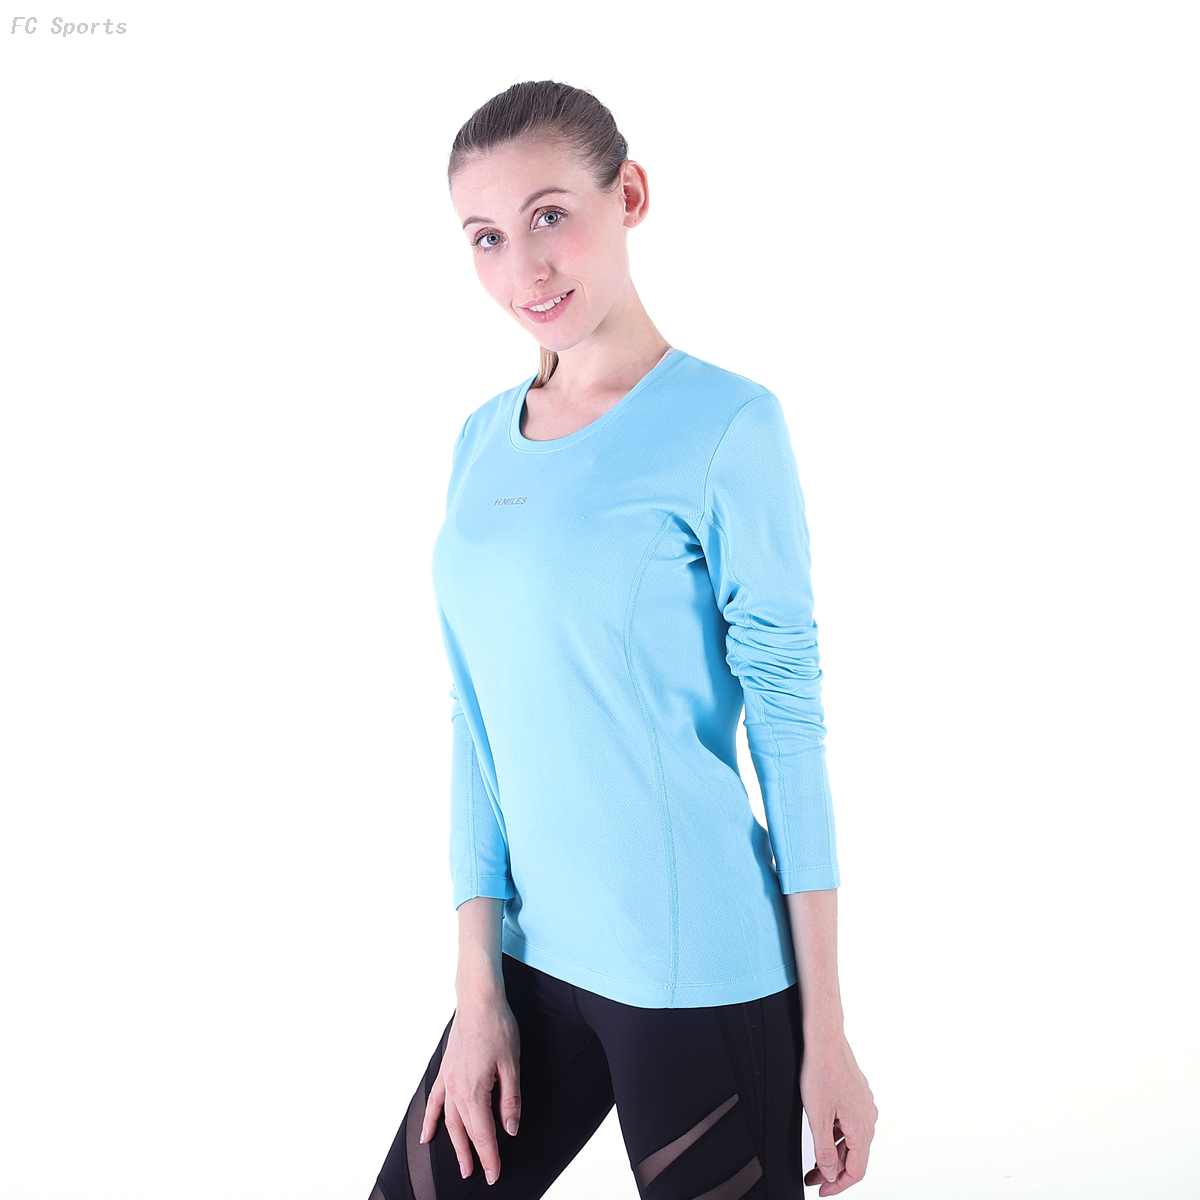 FC Sports Long Shirt Dry Fit Style Women Yoga Wear Slim Breathable Fitness Clothes Wholesale 2019